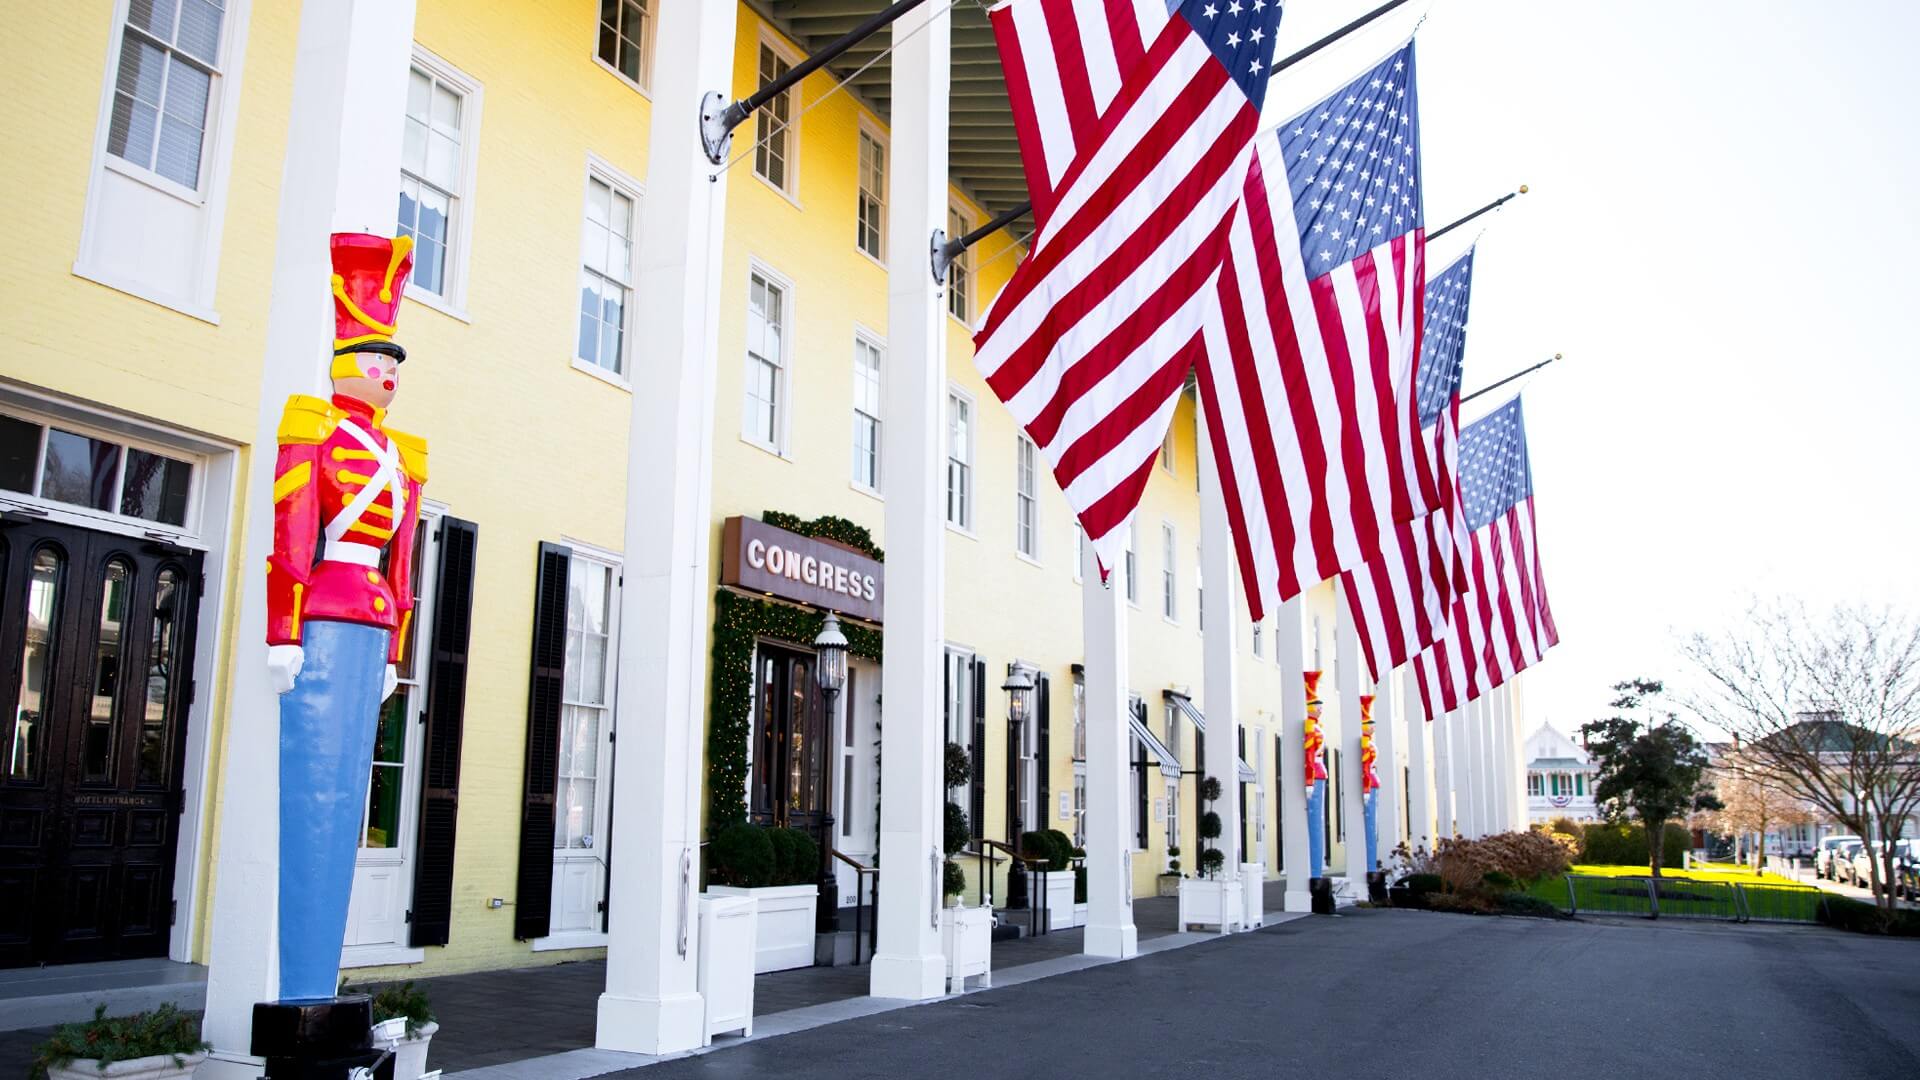 Congress Hall Hotel Stay at America's First Seaside Resort